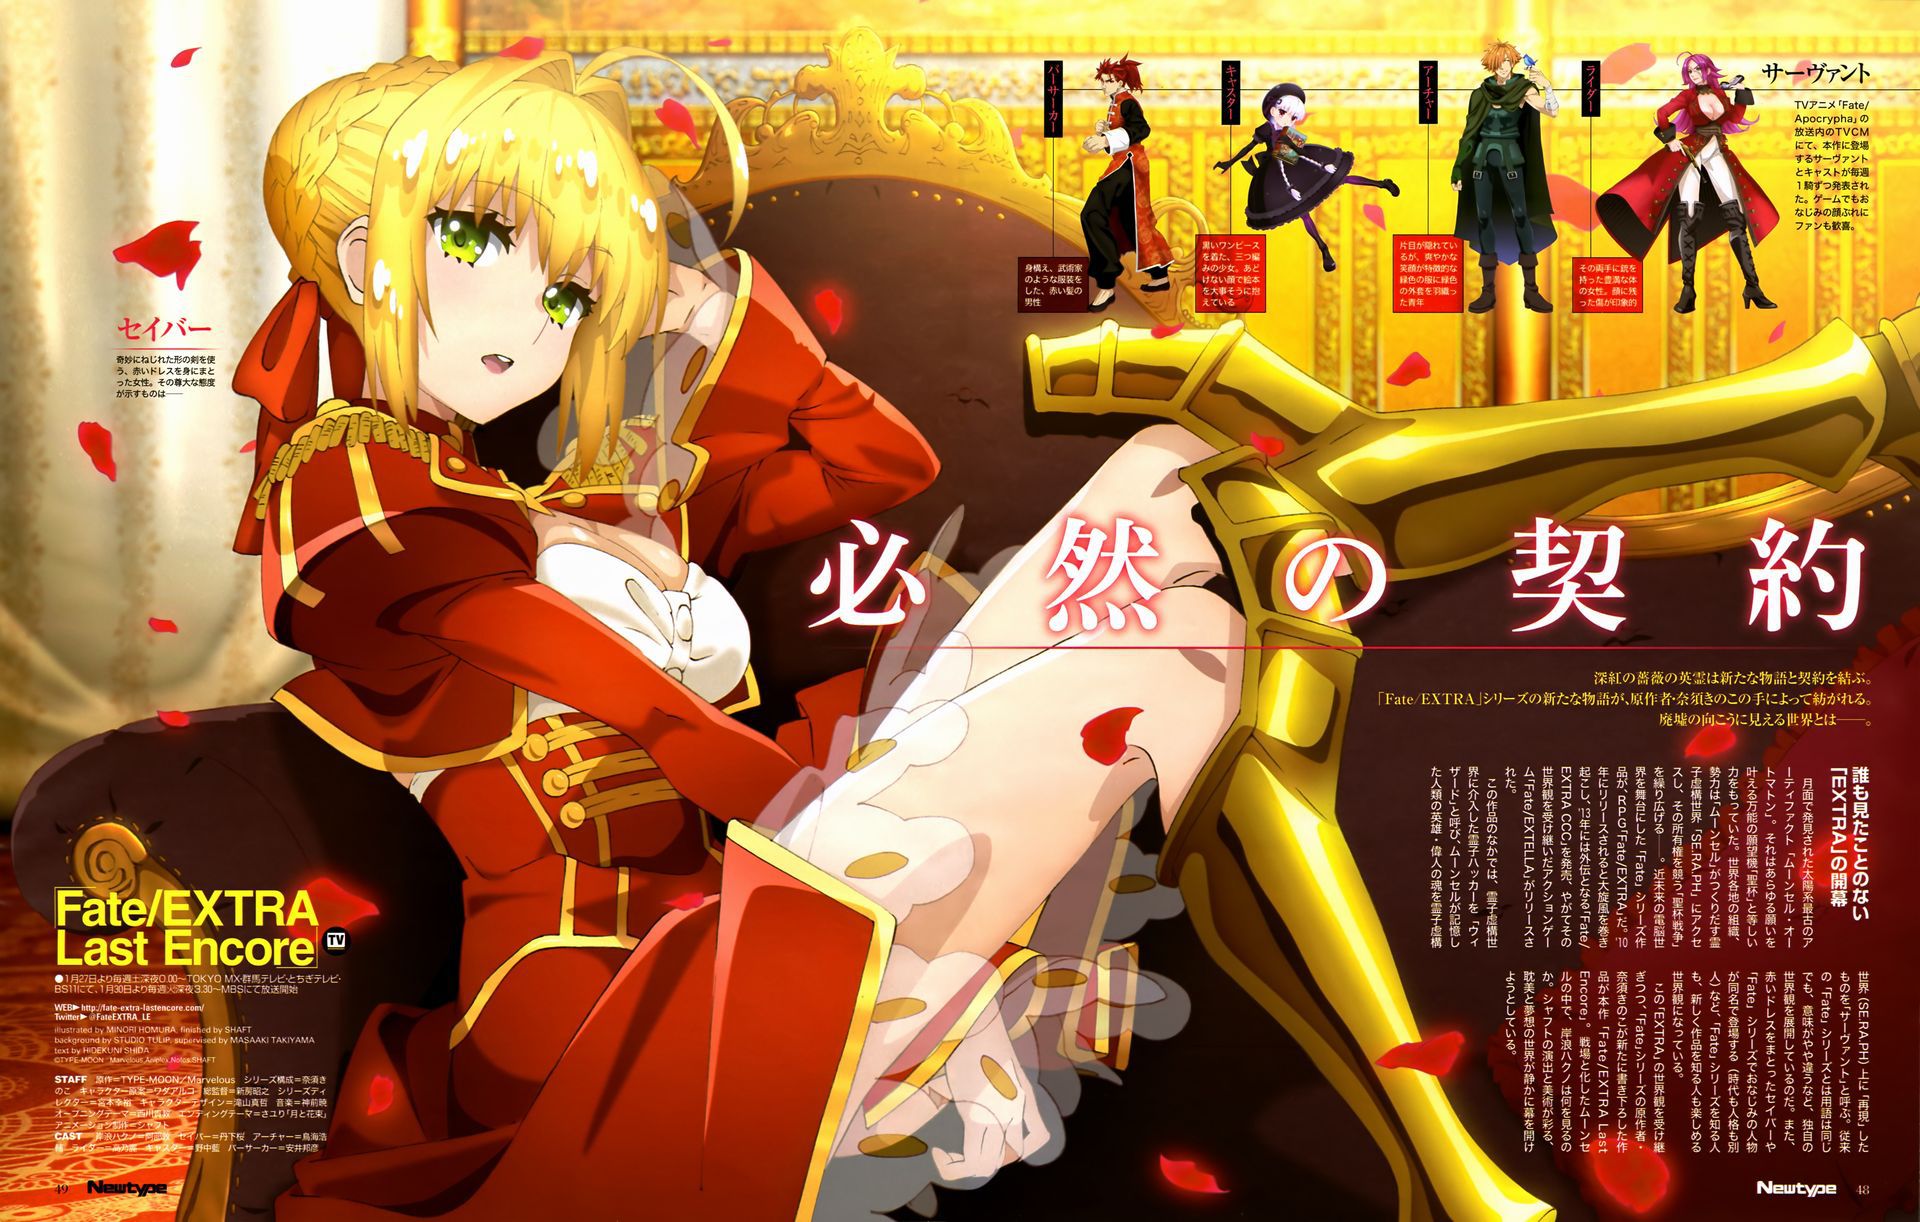 [Secondary ZIP] is about to start anime 100 pieces of cute image summary of Nero Claudius so soon 99